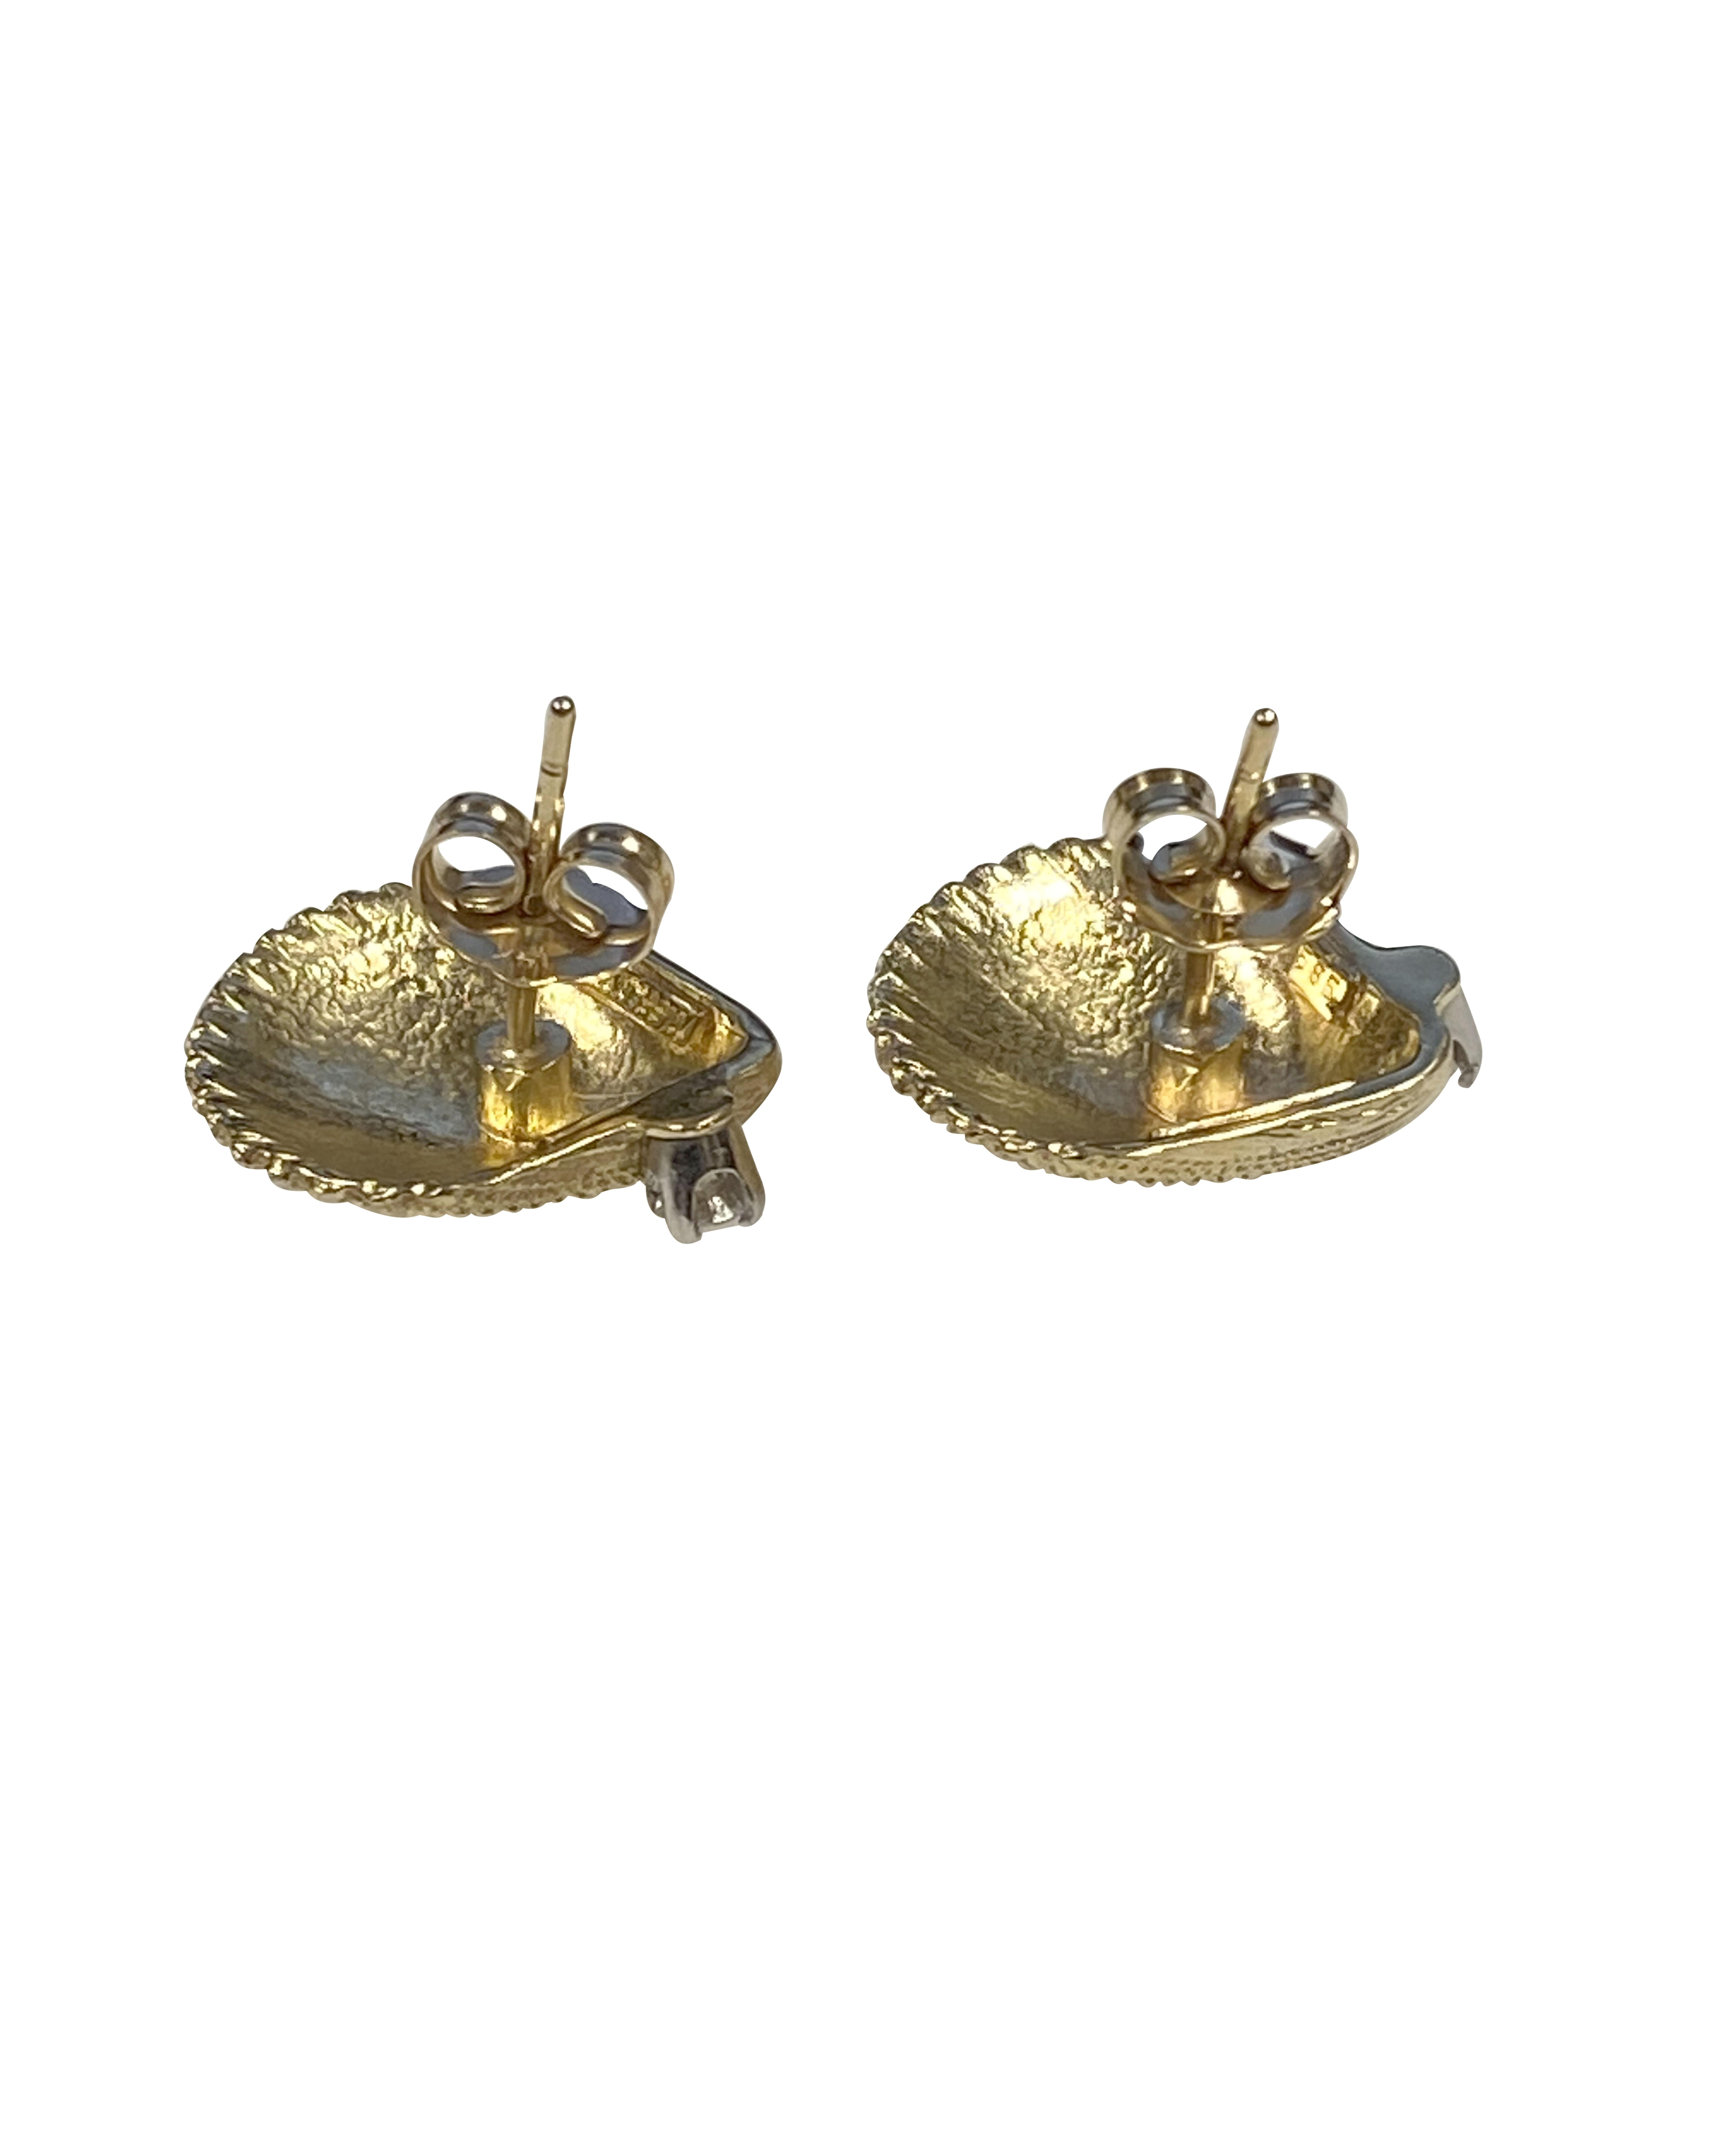 Circa 1980 Tiffany & Company 14k Yellow Gold Sea Shell form Earrings, measuring 9/16 X 1/2 inch, having a realistic textured finish and each set with a Round brilliant cut Diamond totaling .10 Carat for the pair, post backs, excellent near unworn